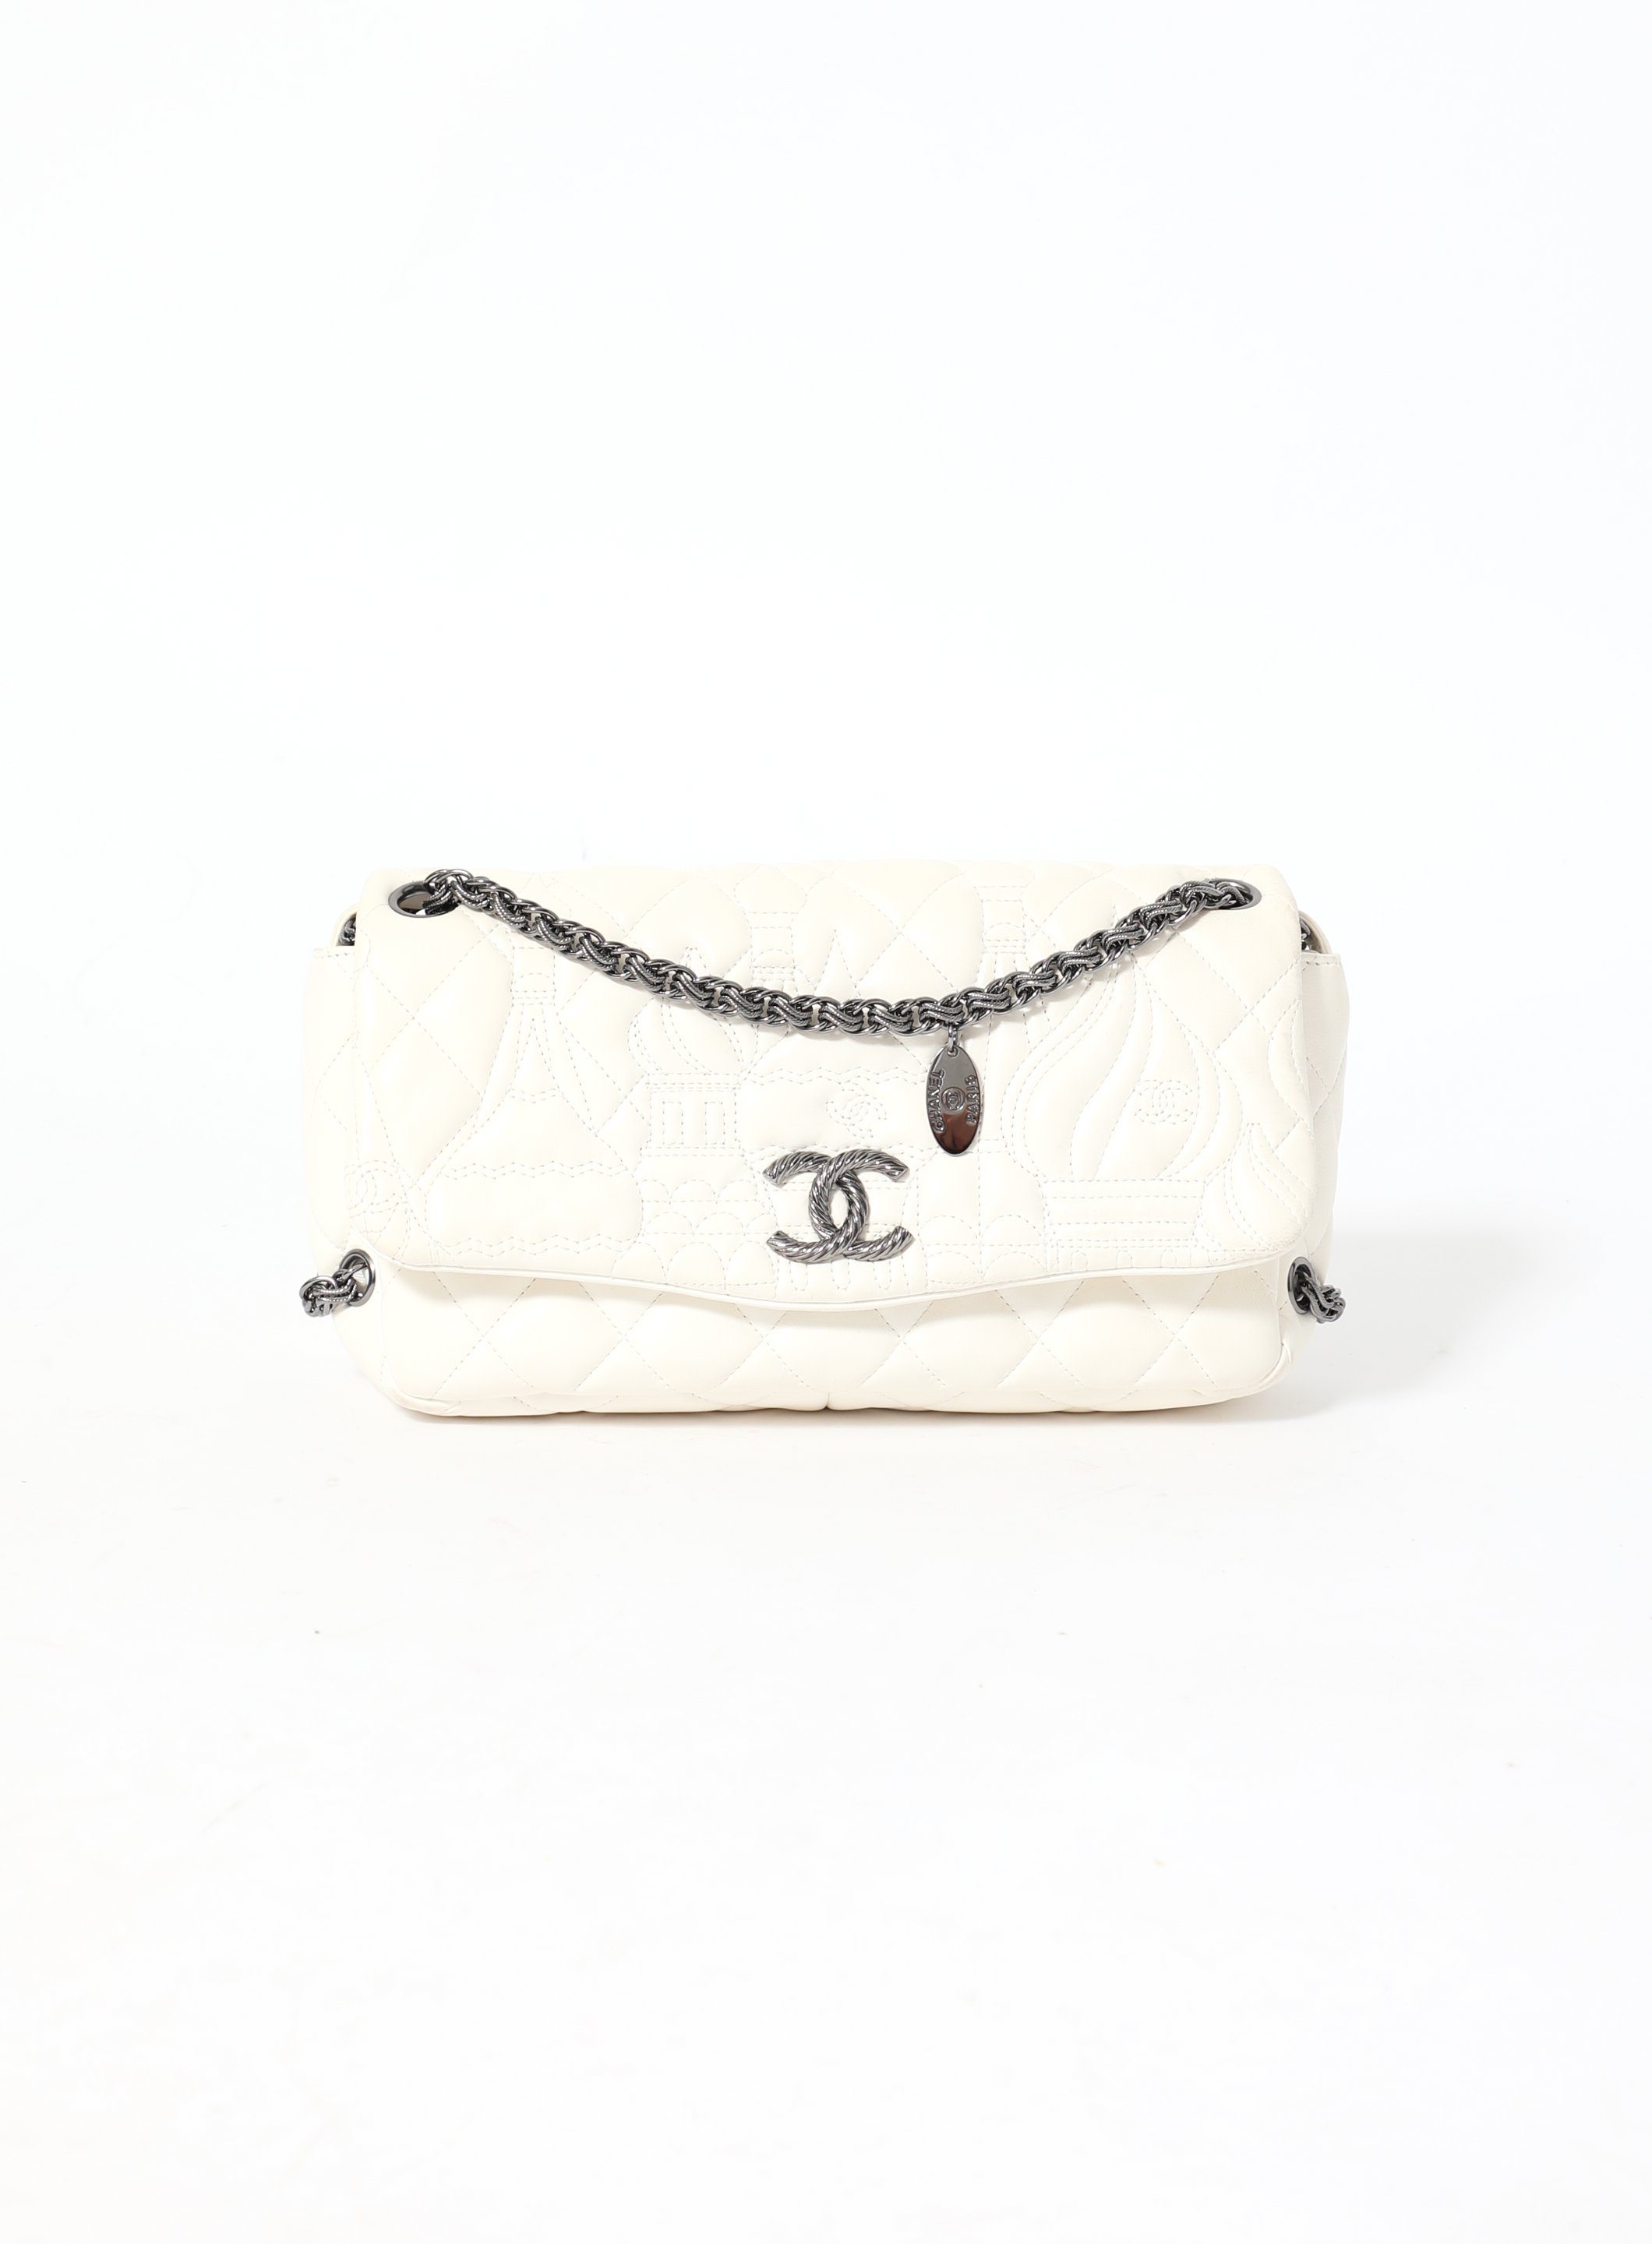 white chanel bag for sale